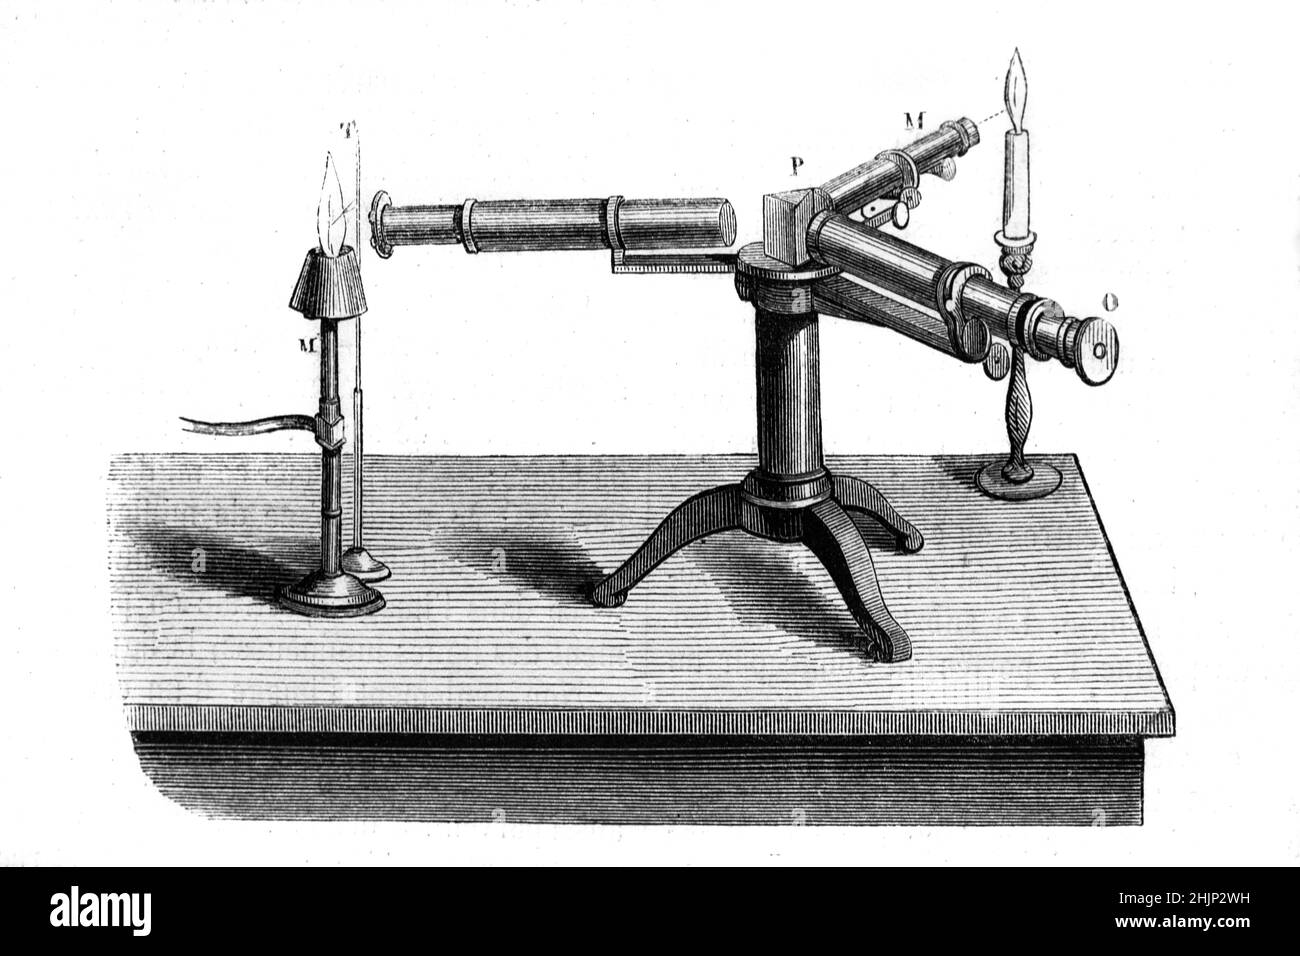 Early Spectroscope or Spectrometer used in Optical Spectroscopy. Vintage Illustration or Engraving 1865. Stock Photo